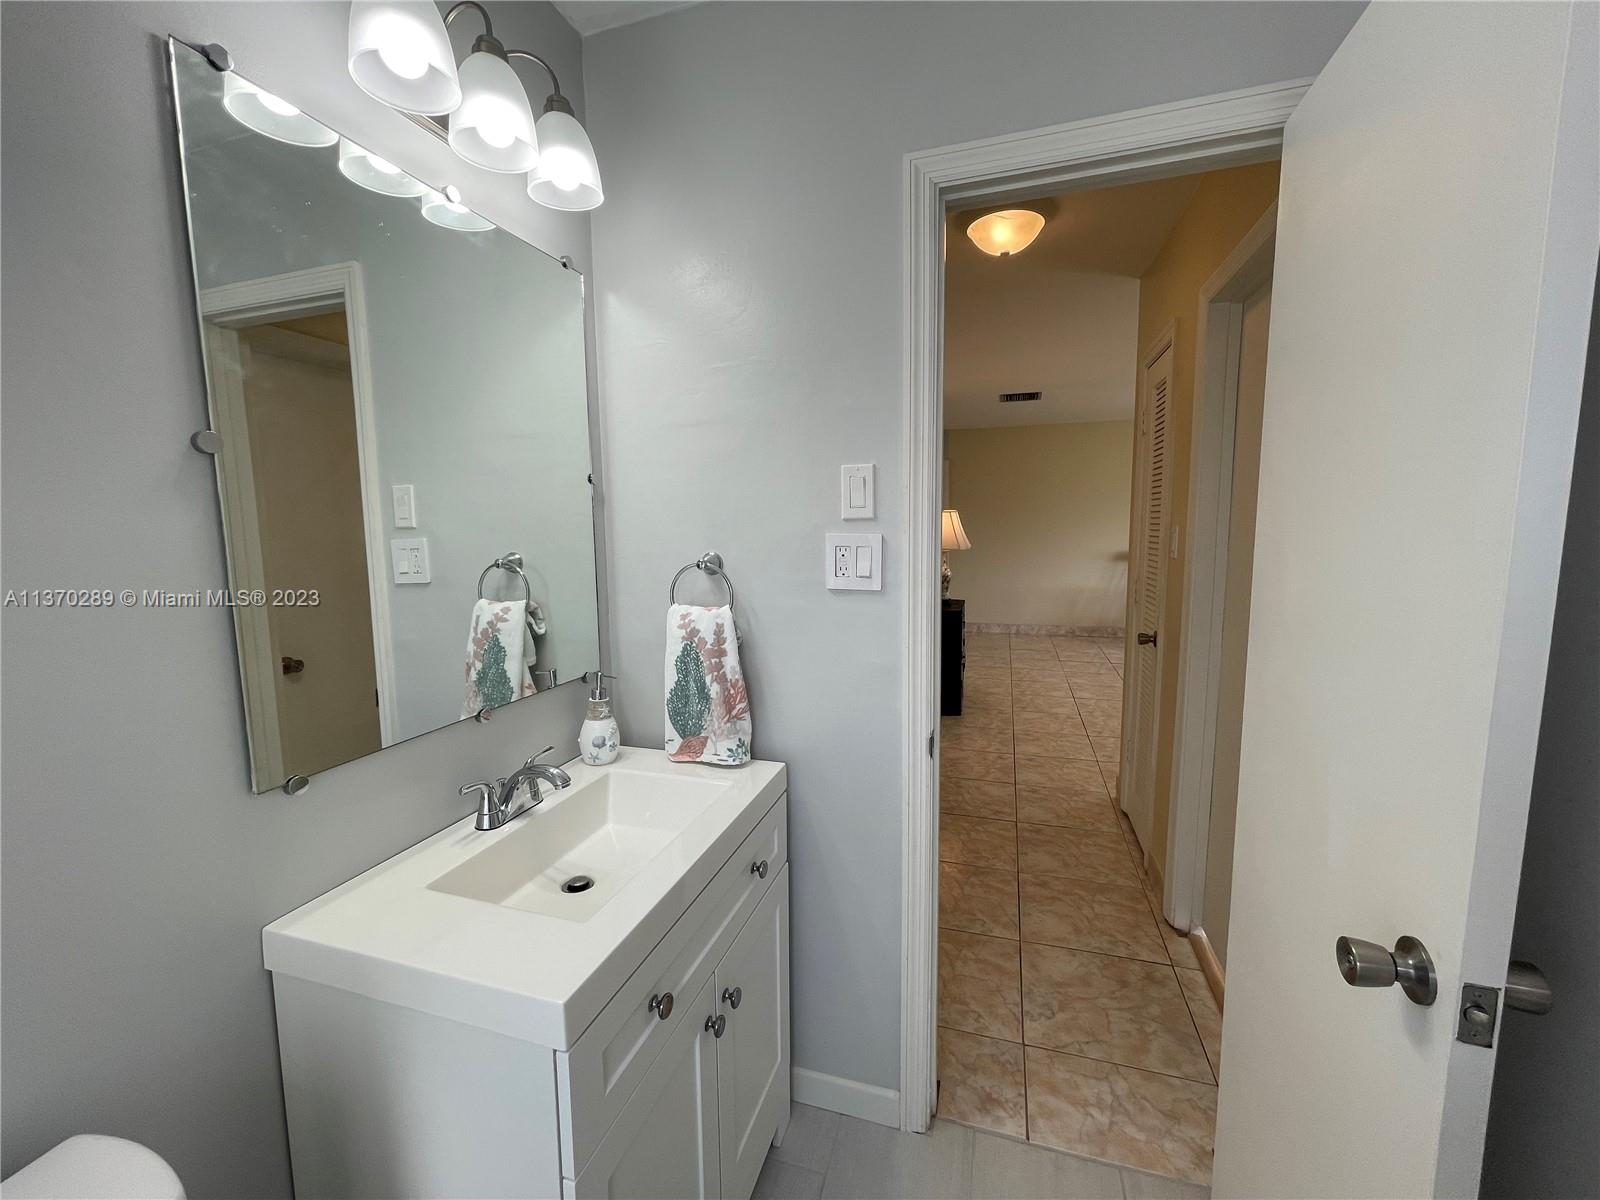 Renovated bathroom with tub/shower combo